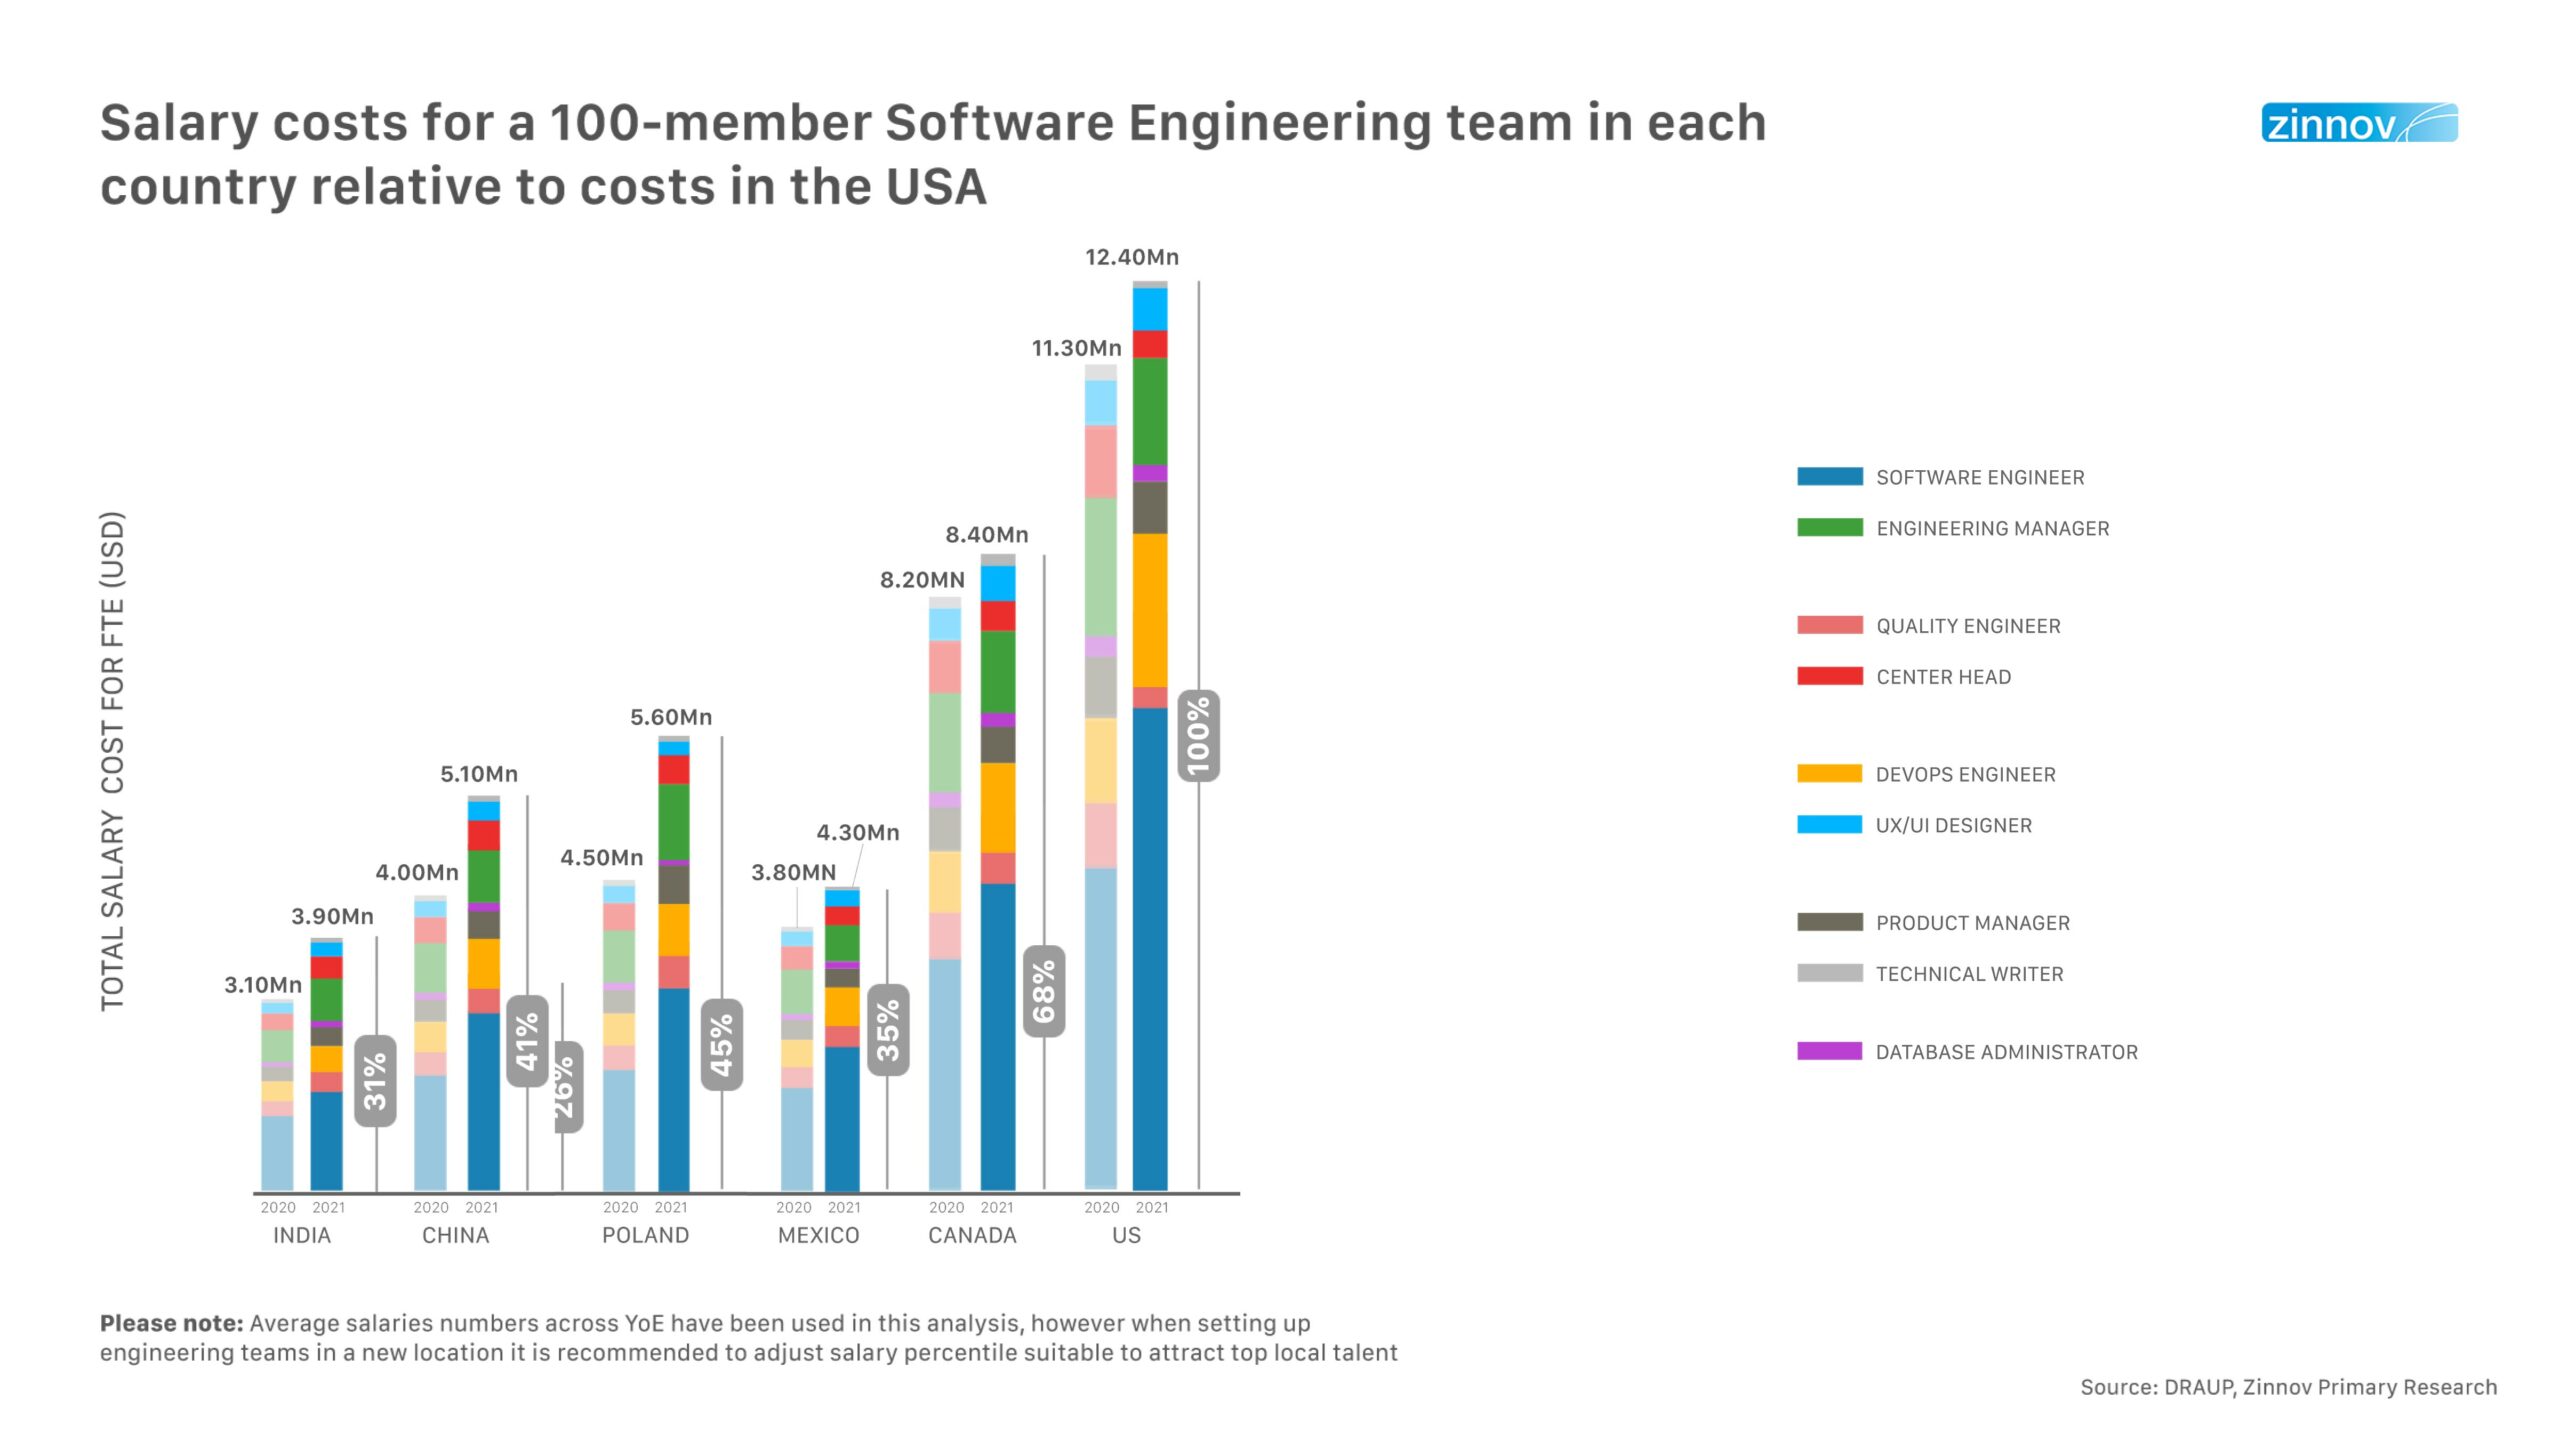 Salary costs for a 100-member software engineering team in each country relative to costs in the USA